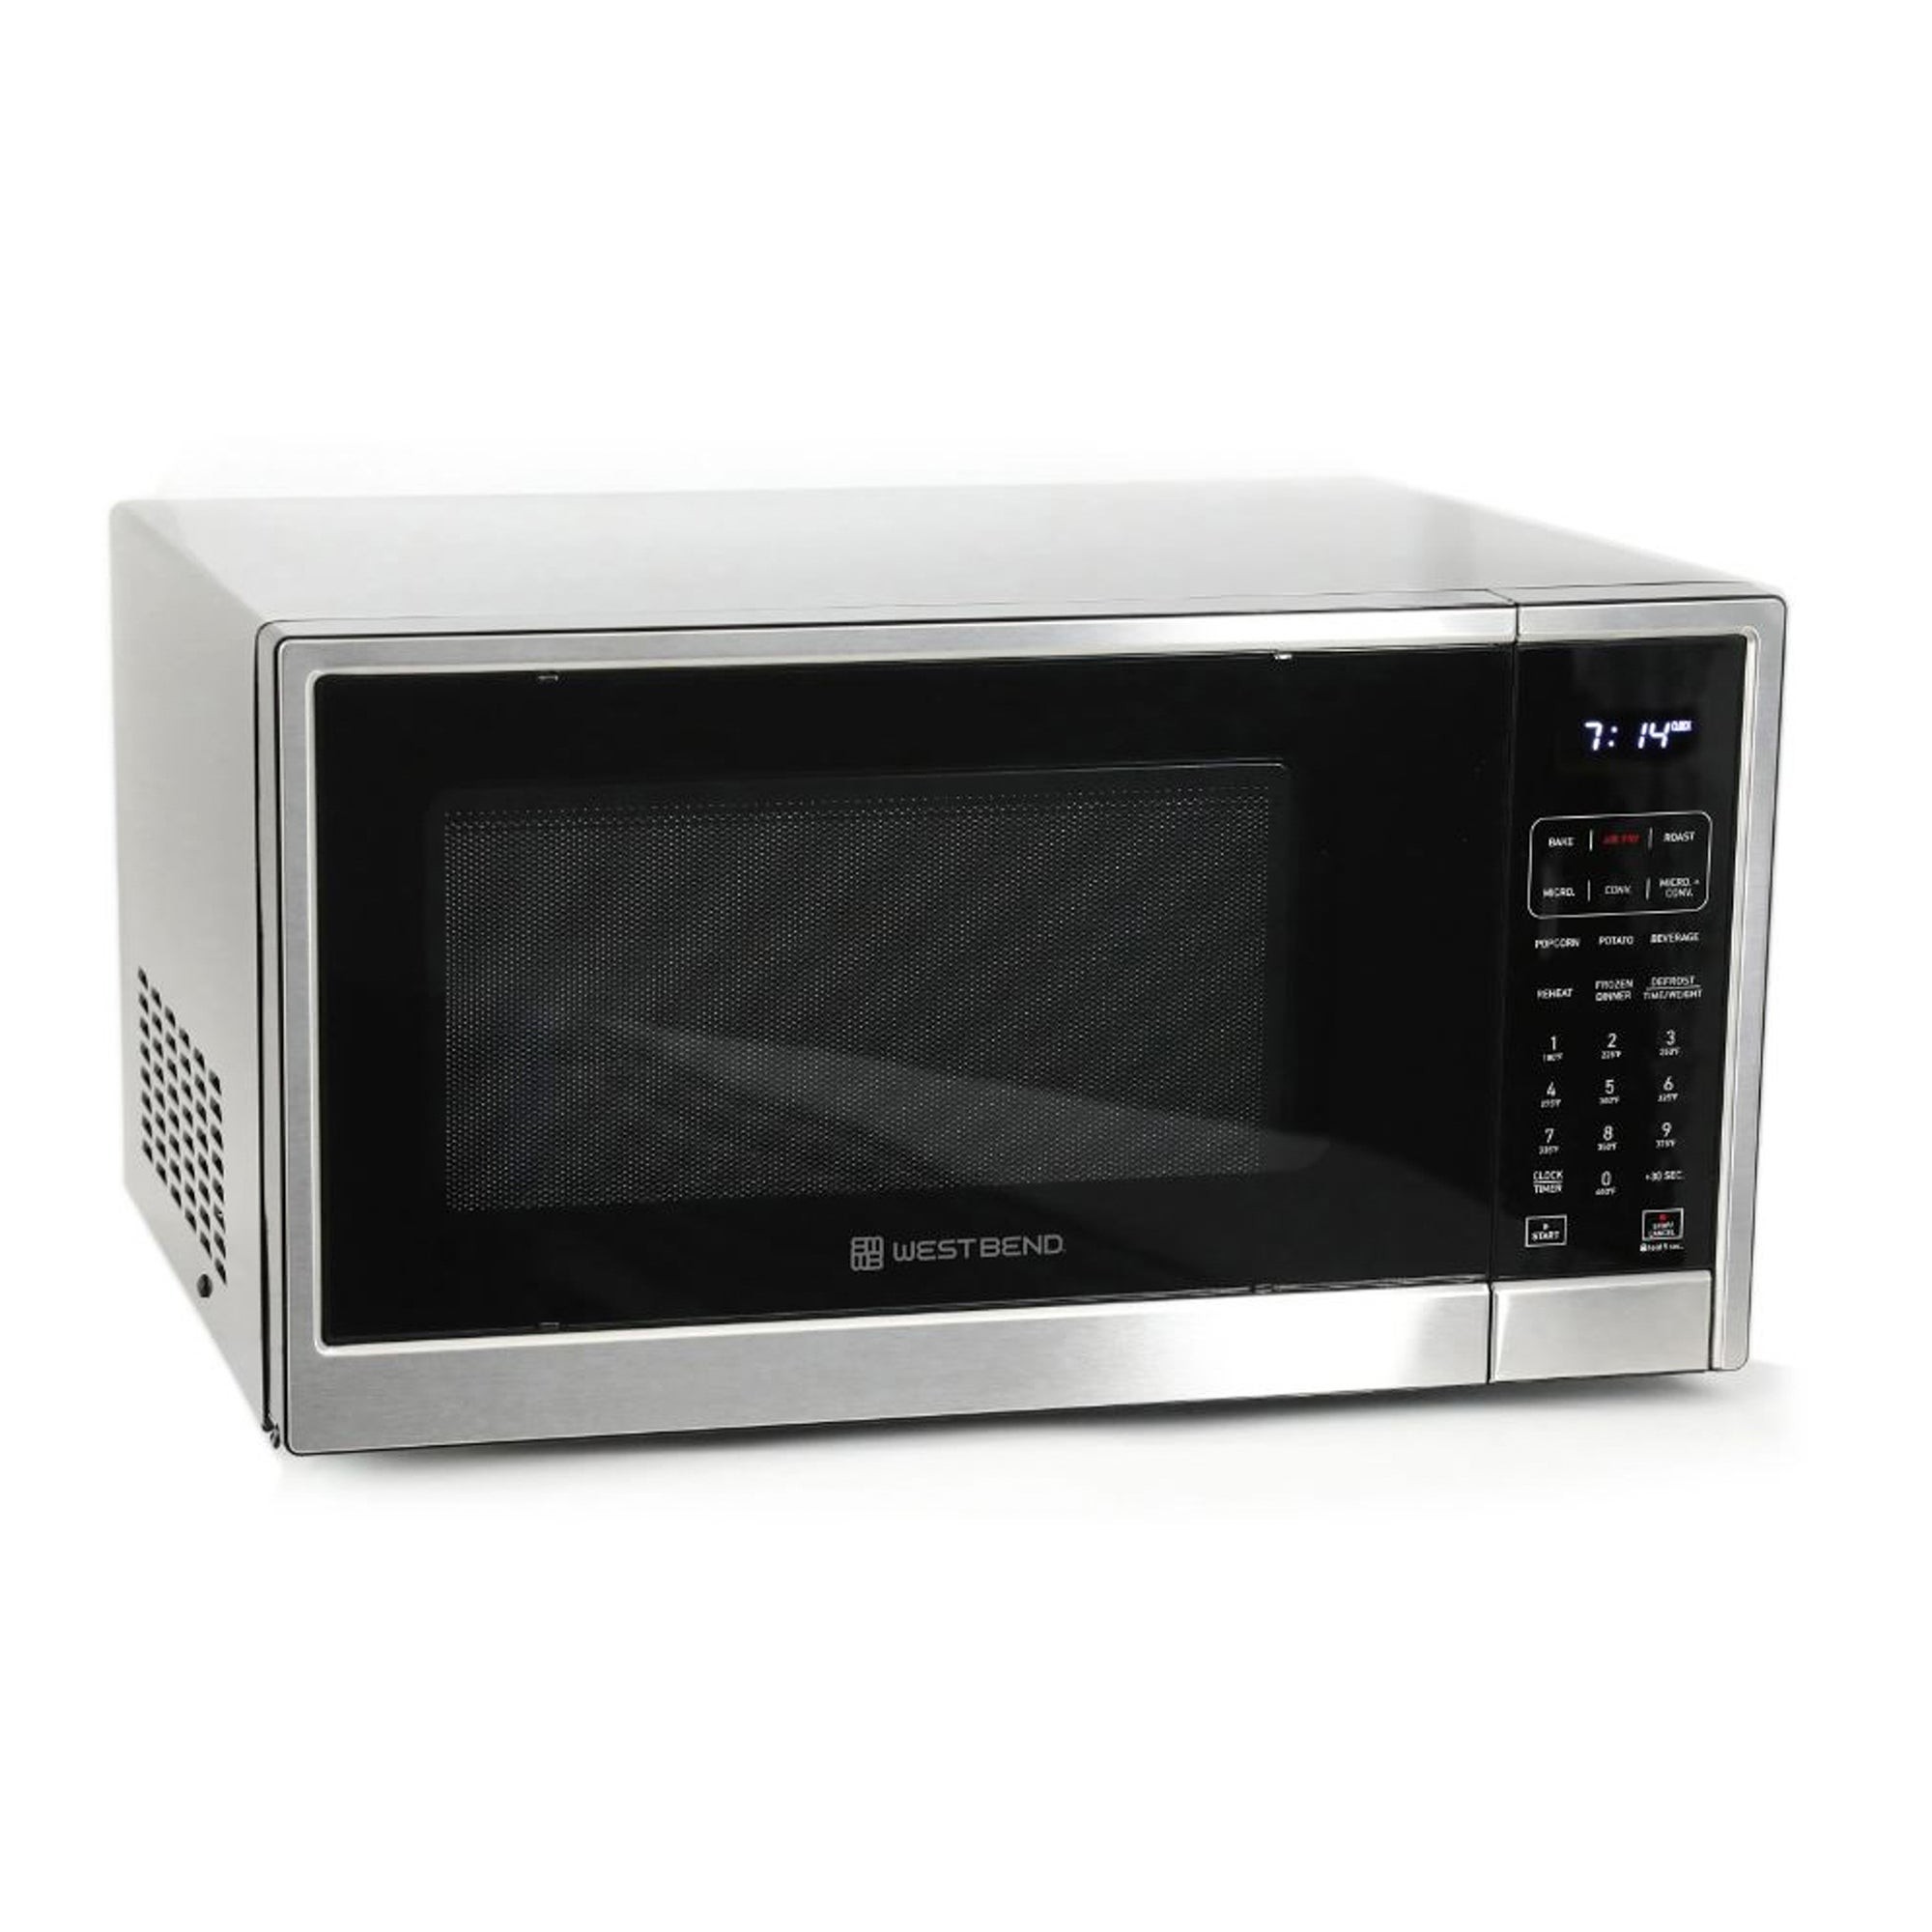 1.3 Cu. Ft. 3-in-1 Microwave Air Fry Convection Oven Stainless Steel